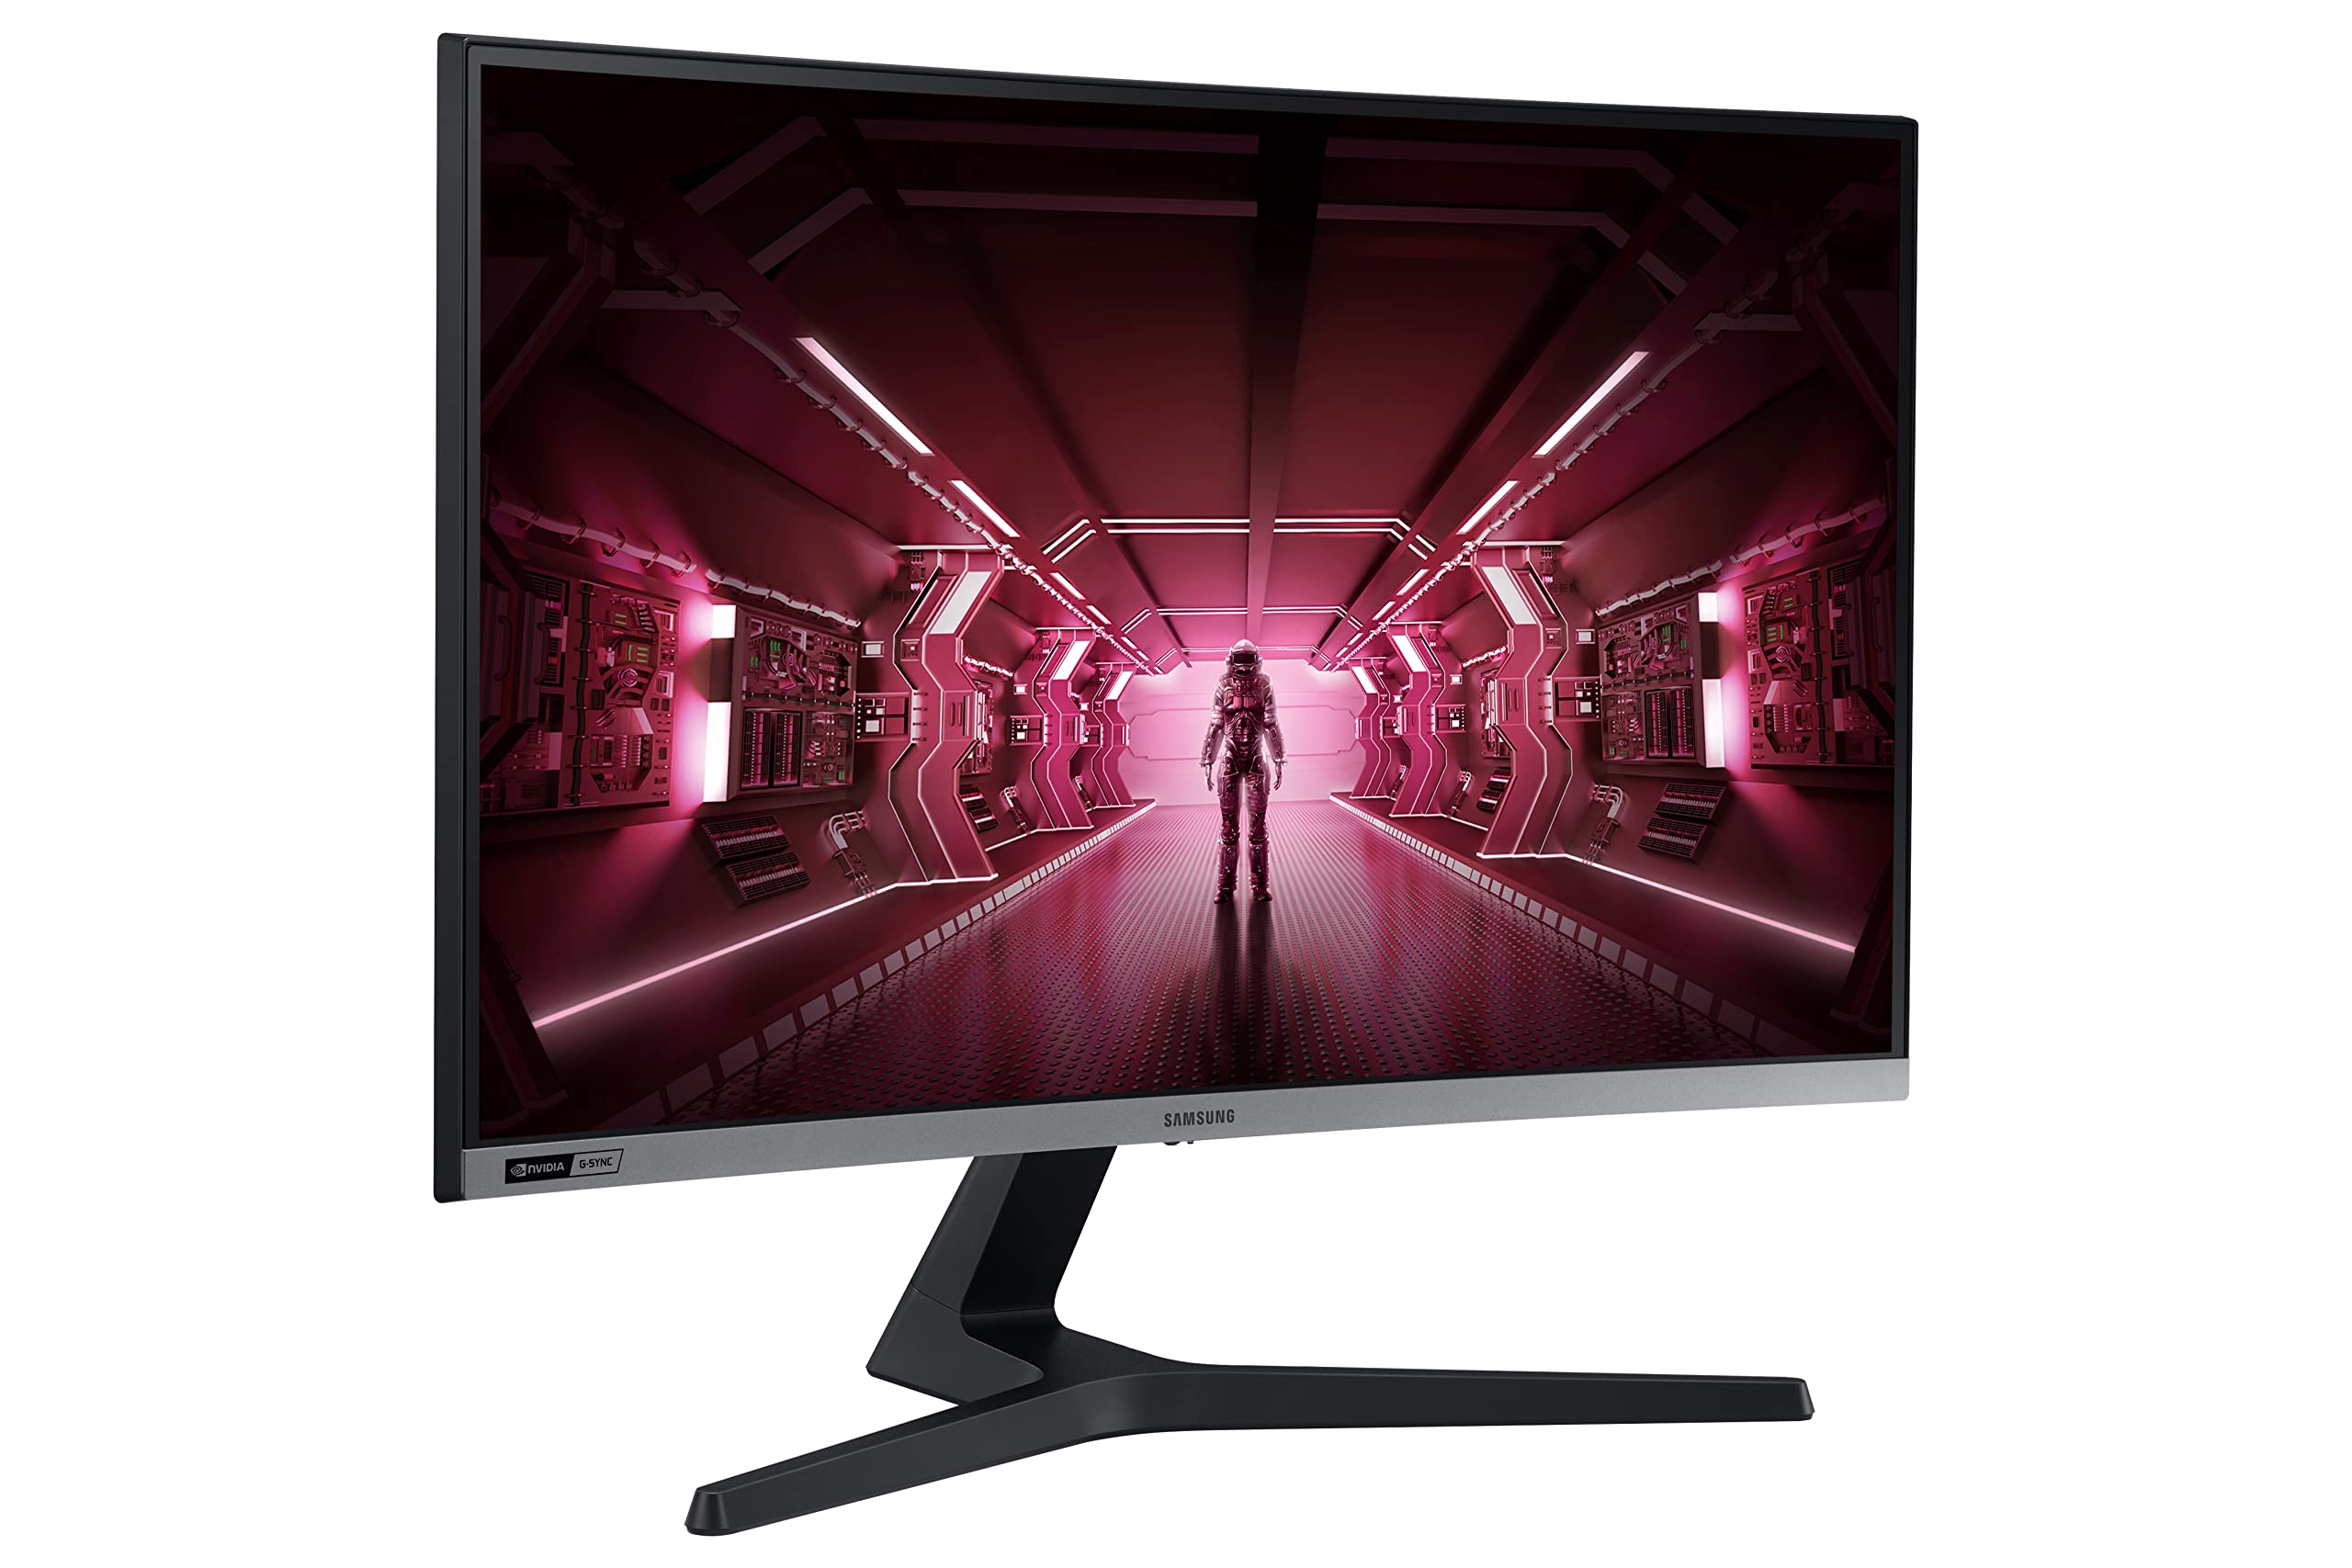 Samsung 27-Inch CRG5 240Hz Curved Gaming Monitor (LC27RG50FQNXZA) – Computer Monitor, 1920 x 1080p Resolution, 4ms Response Time, G-Sync Compatible, HDMI,Black